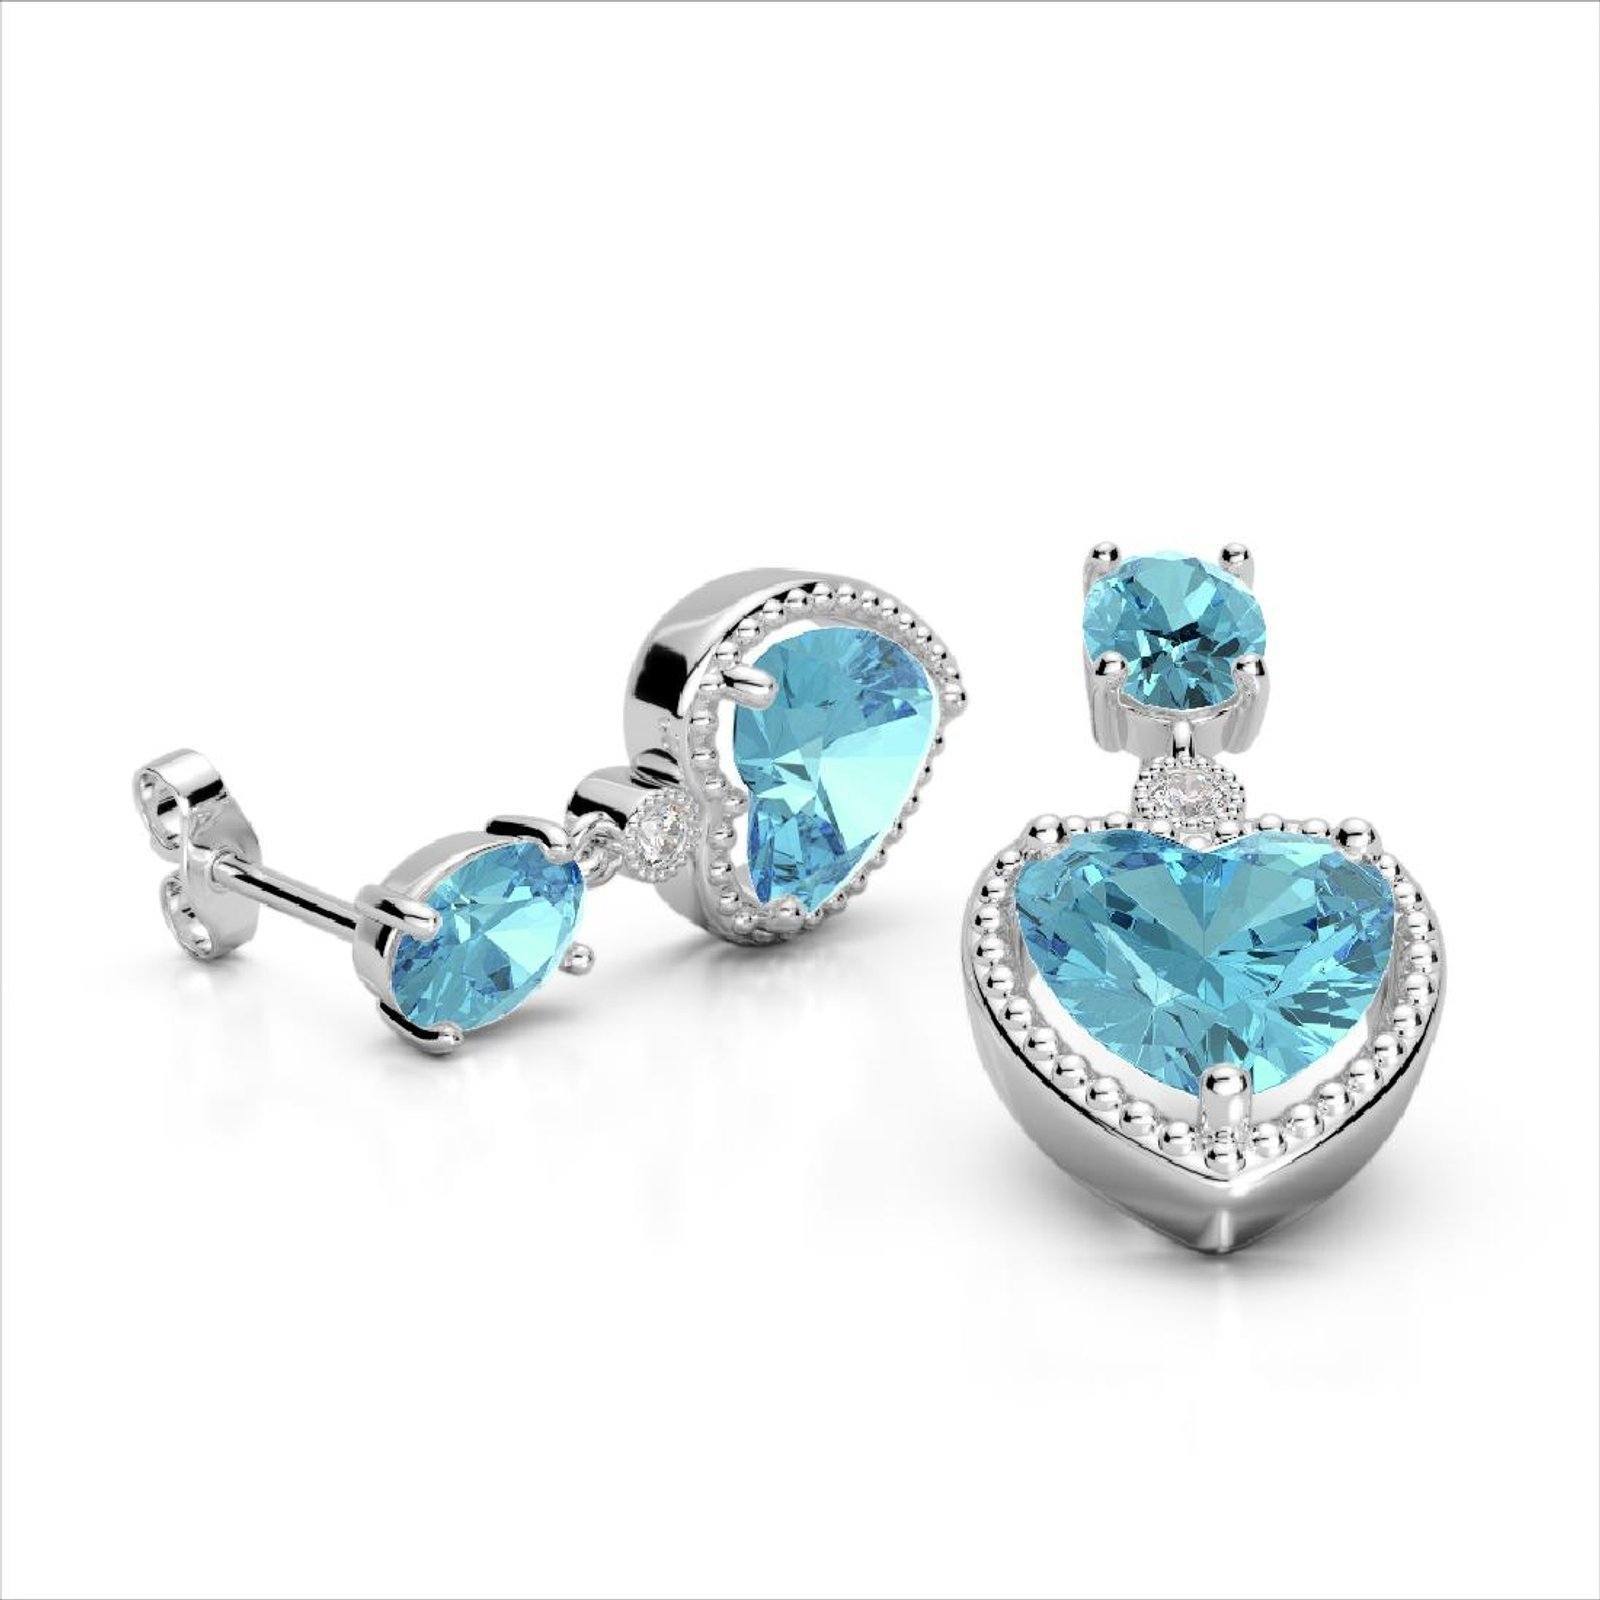 Sky Blue Topaz and Diamond Heart Earrings and Necklace in 10K White Gold, 8CTW of Sparkling Beauty! - The Pink Pigs, A Compassionate Boutique